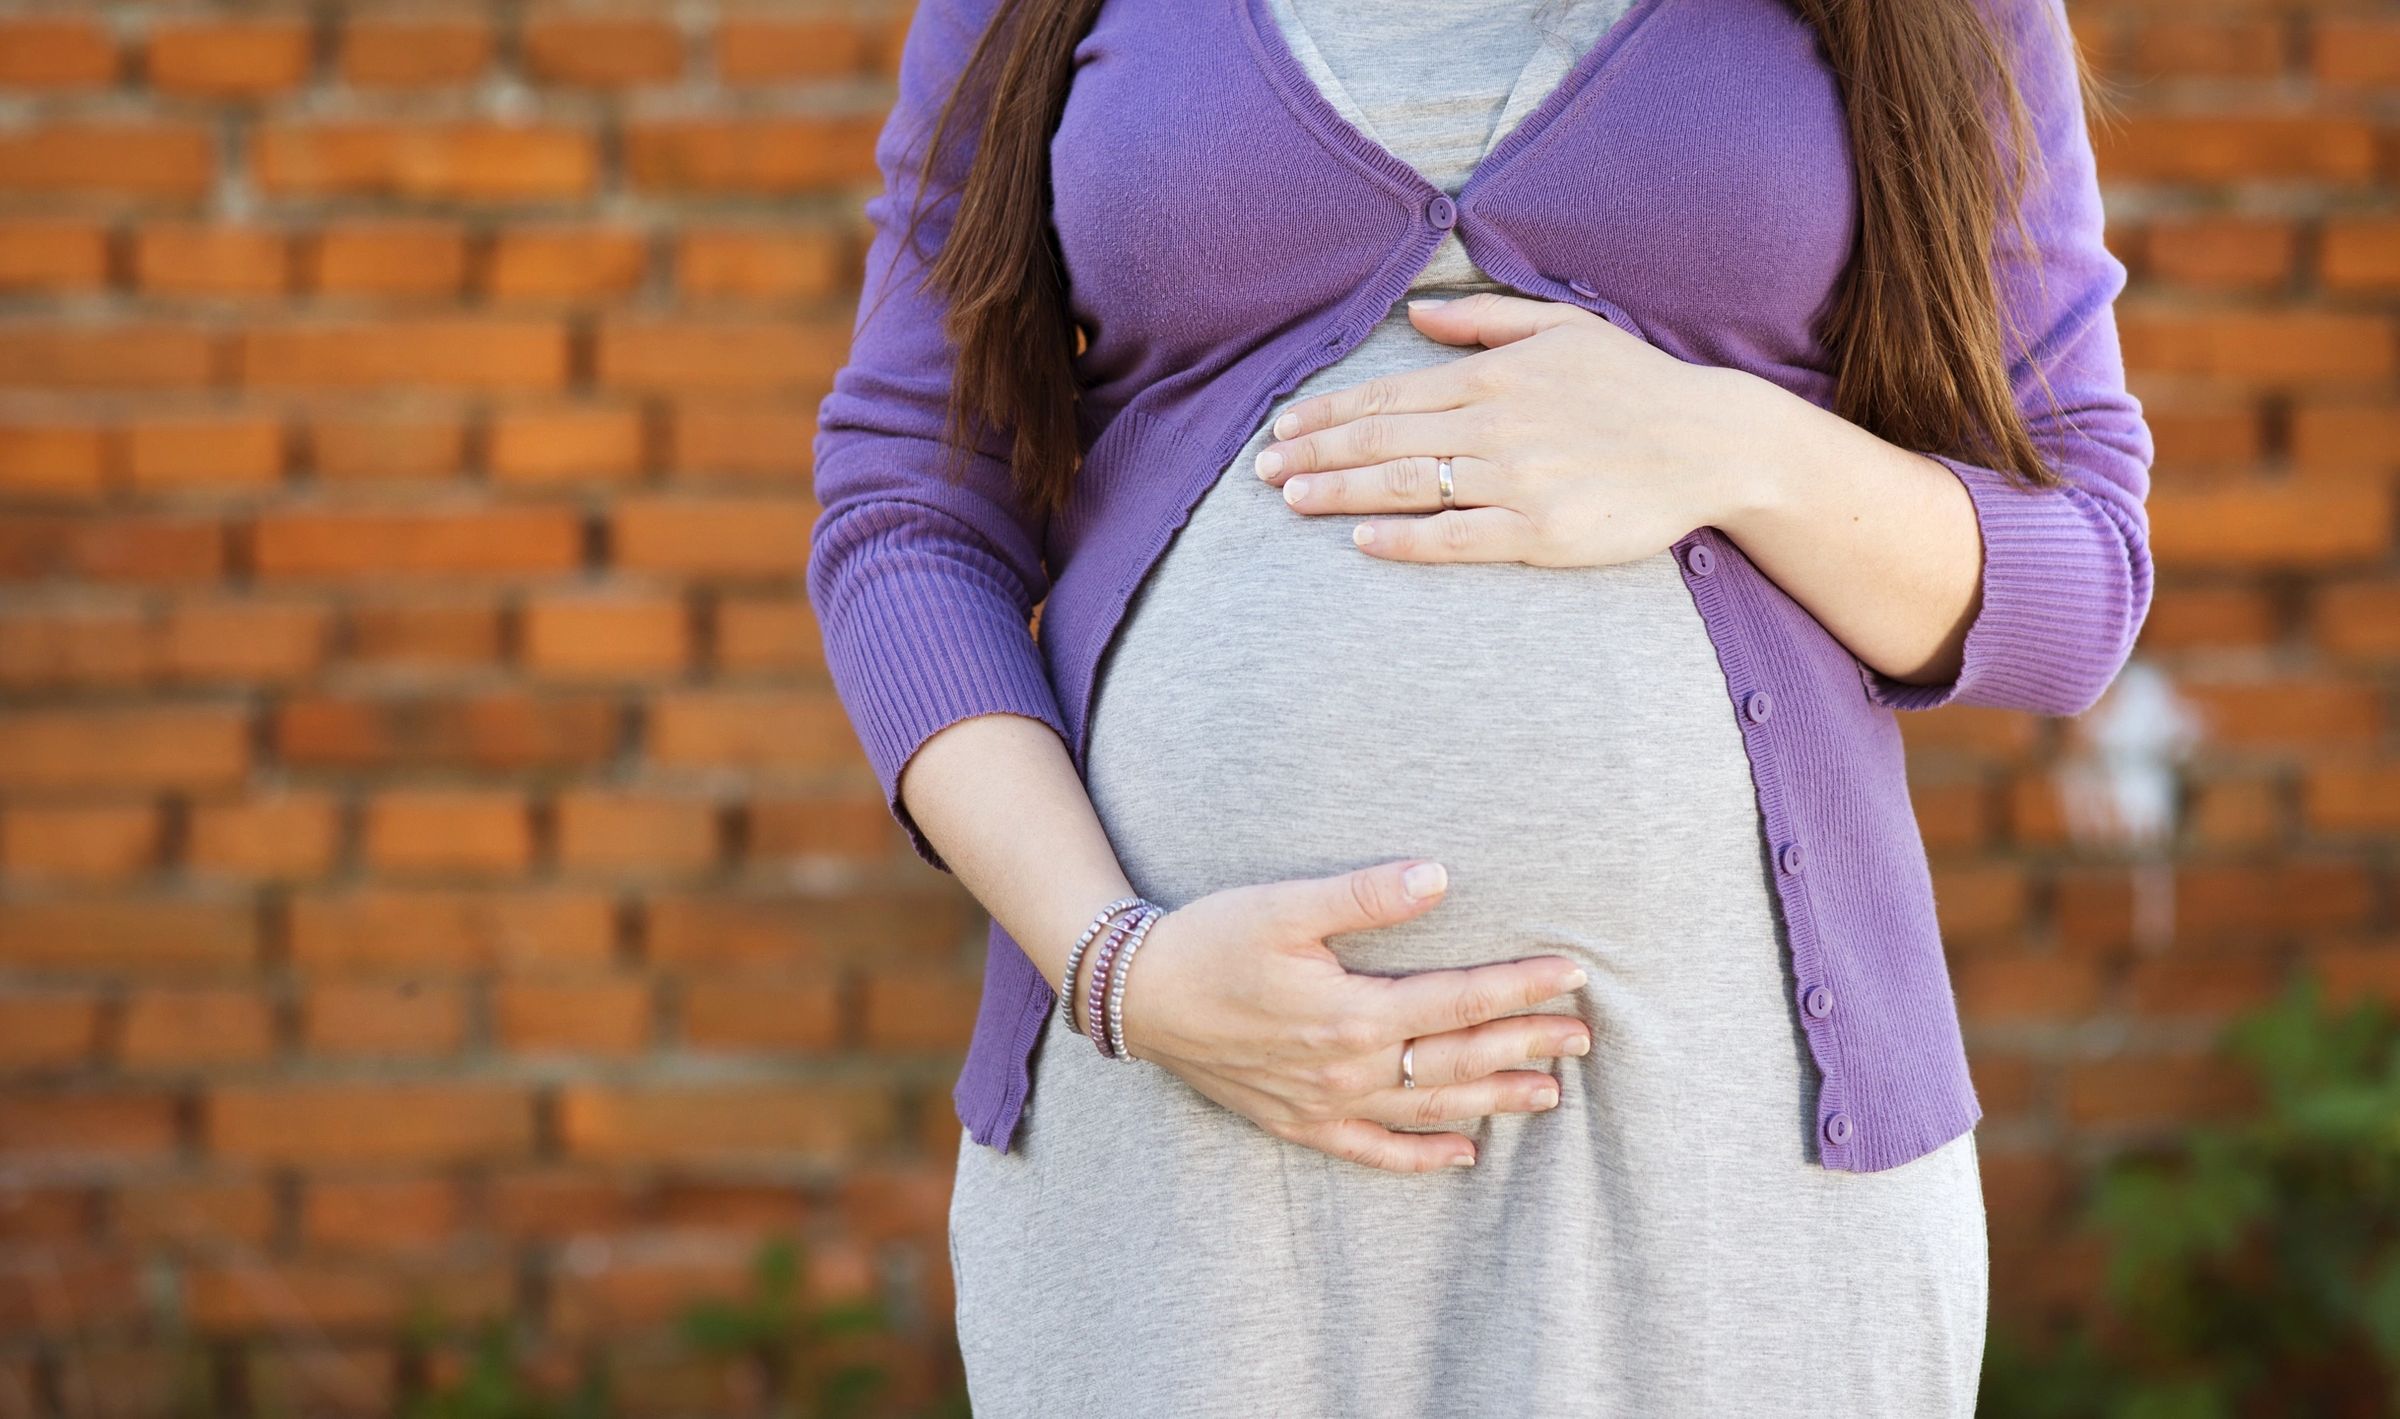 Image Of The Midsection Of A Pregnant Woman Wearing A Grey Dress And Purple Sweater. Her Hands Are On Her Belly. Neither Her Head Nor Legs Are Showing.